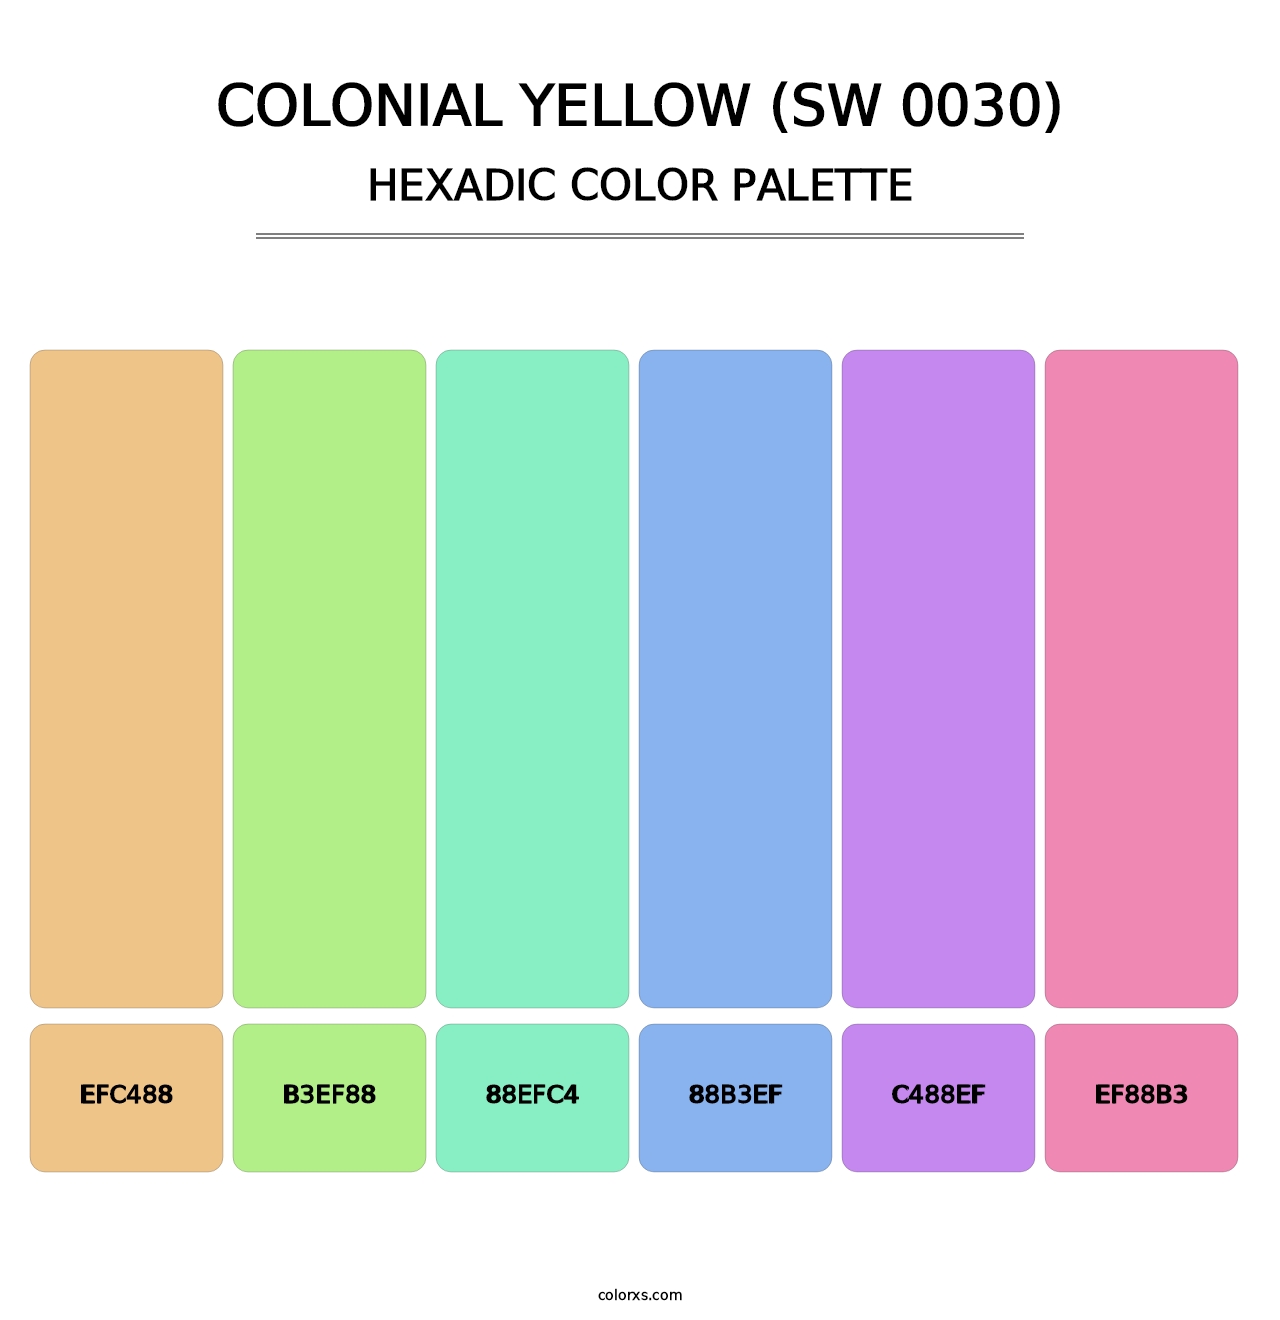 Colonial Yellow (SW 0030) - Hexadic Color Palette